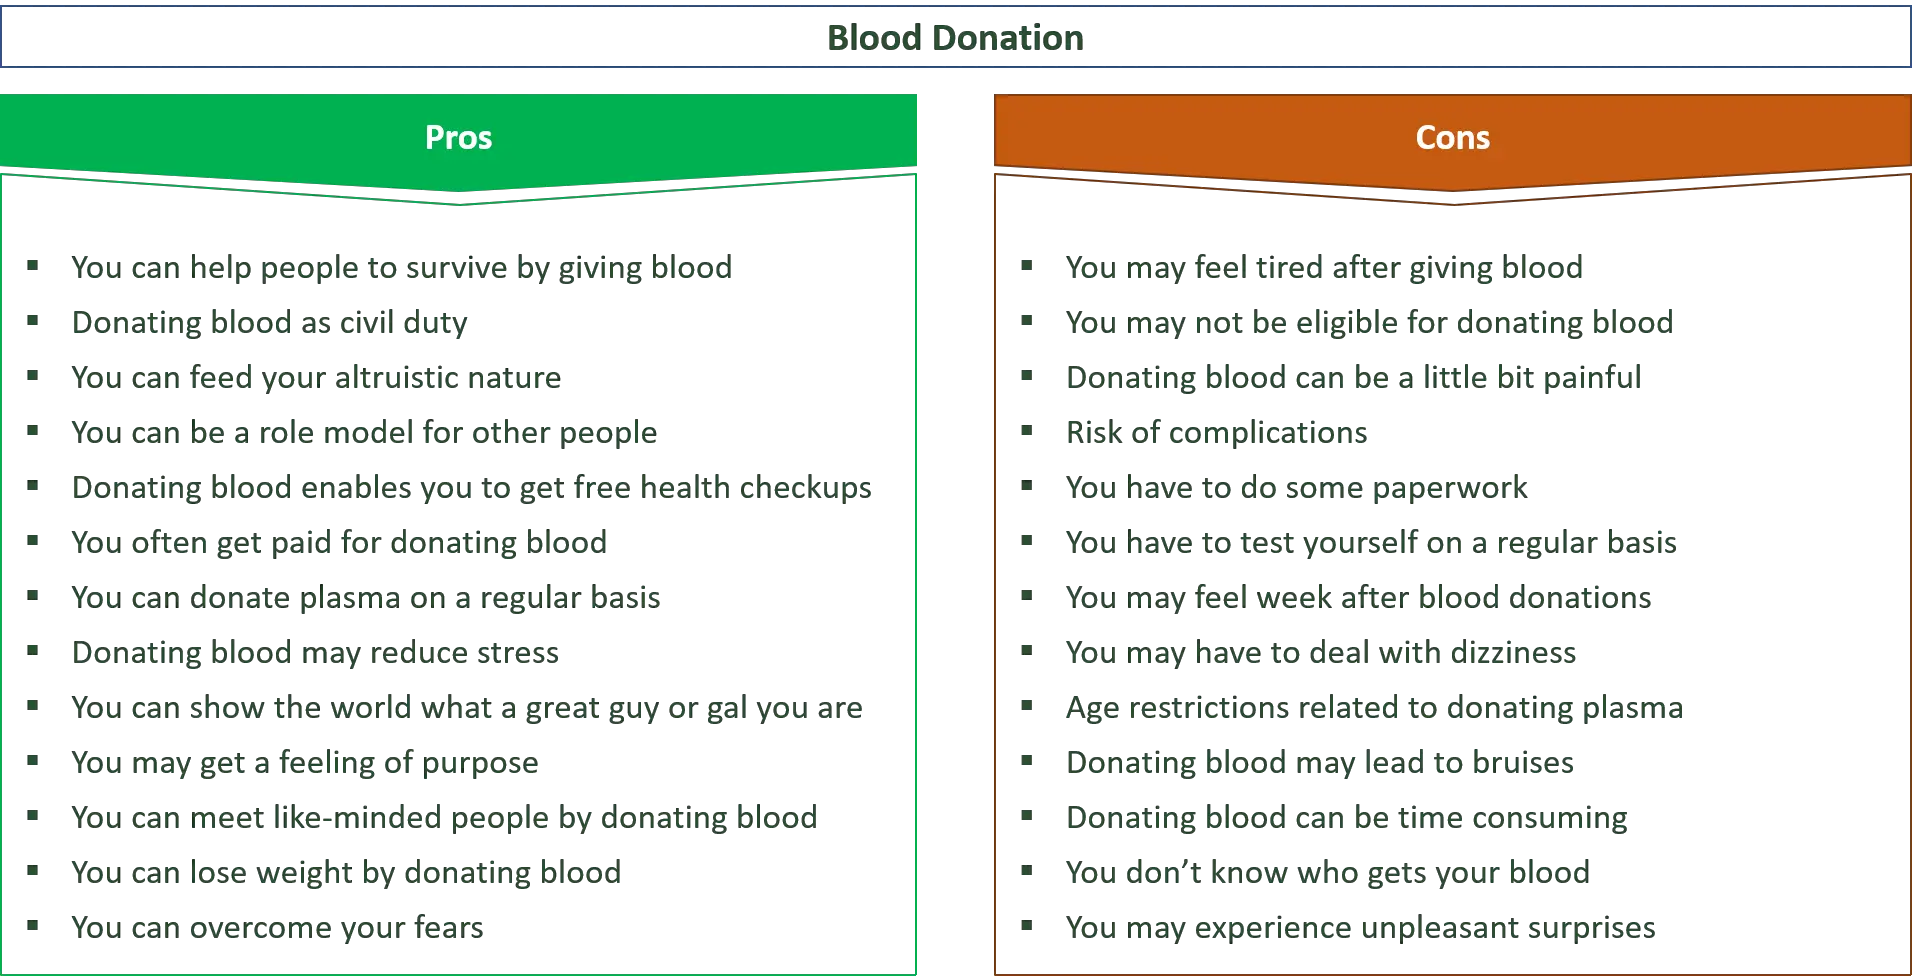 advantages and disadvantages of donating blood